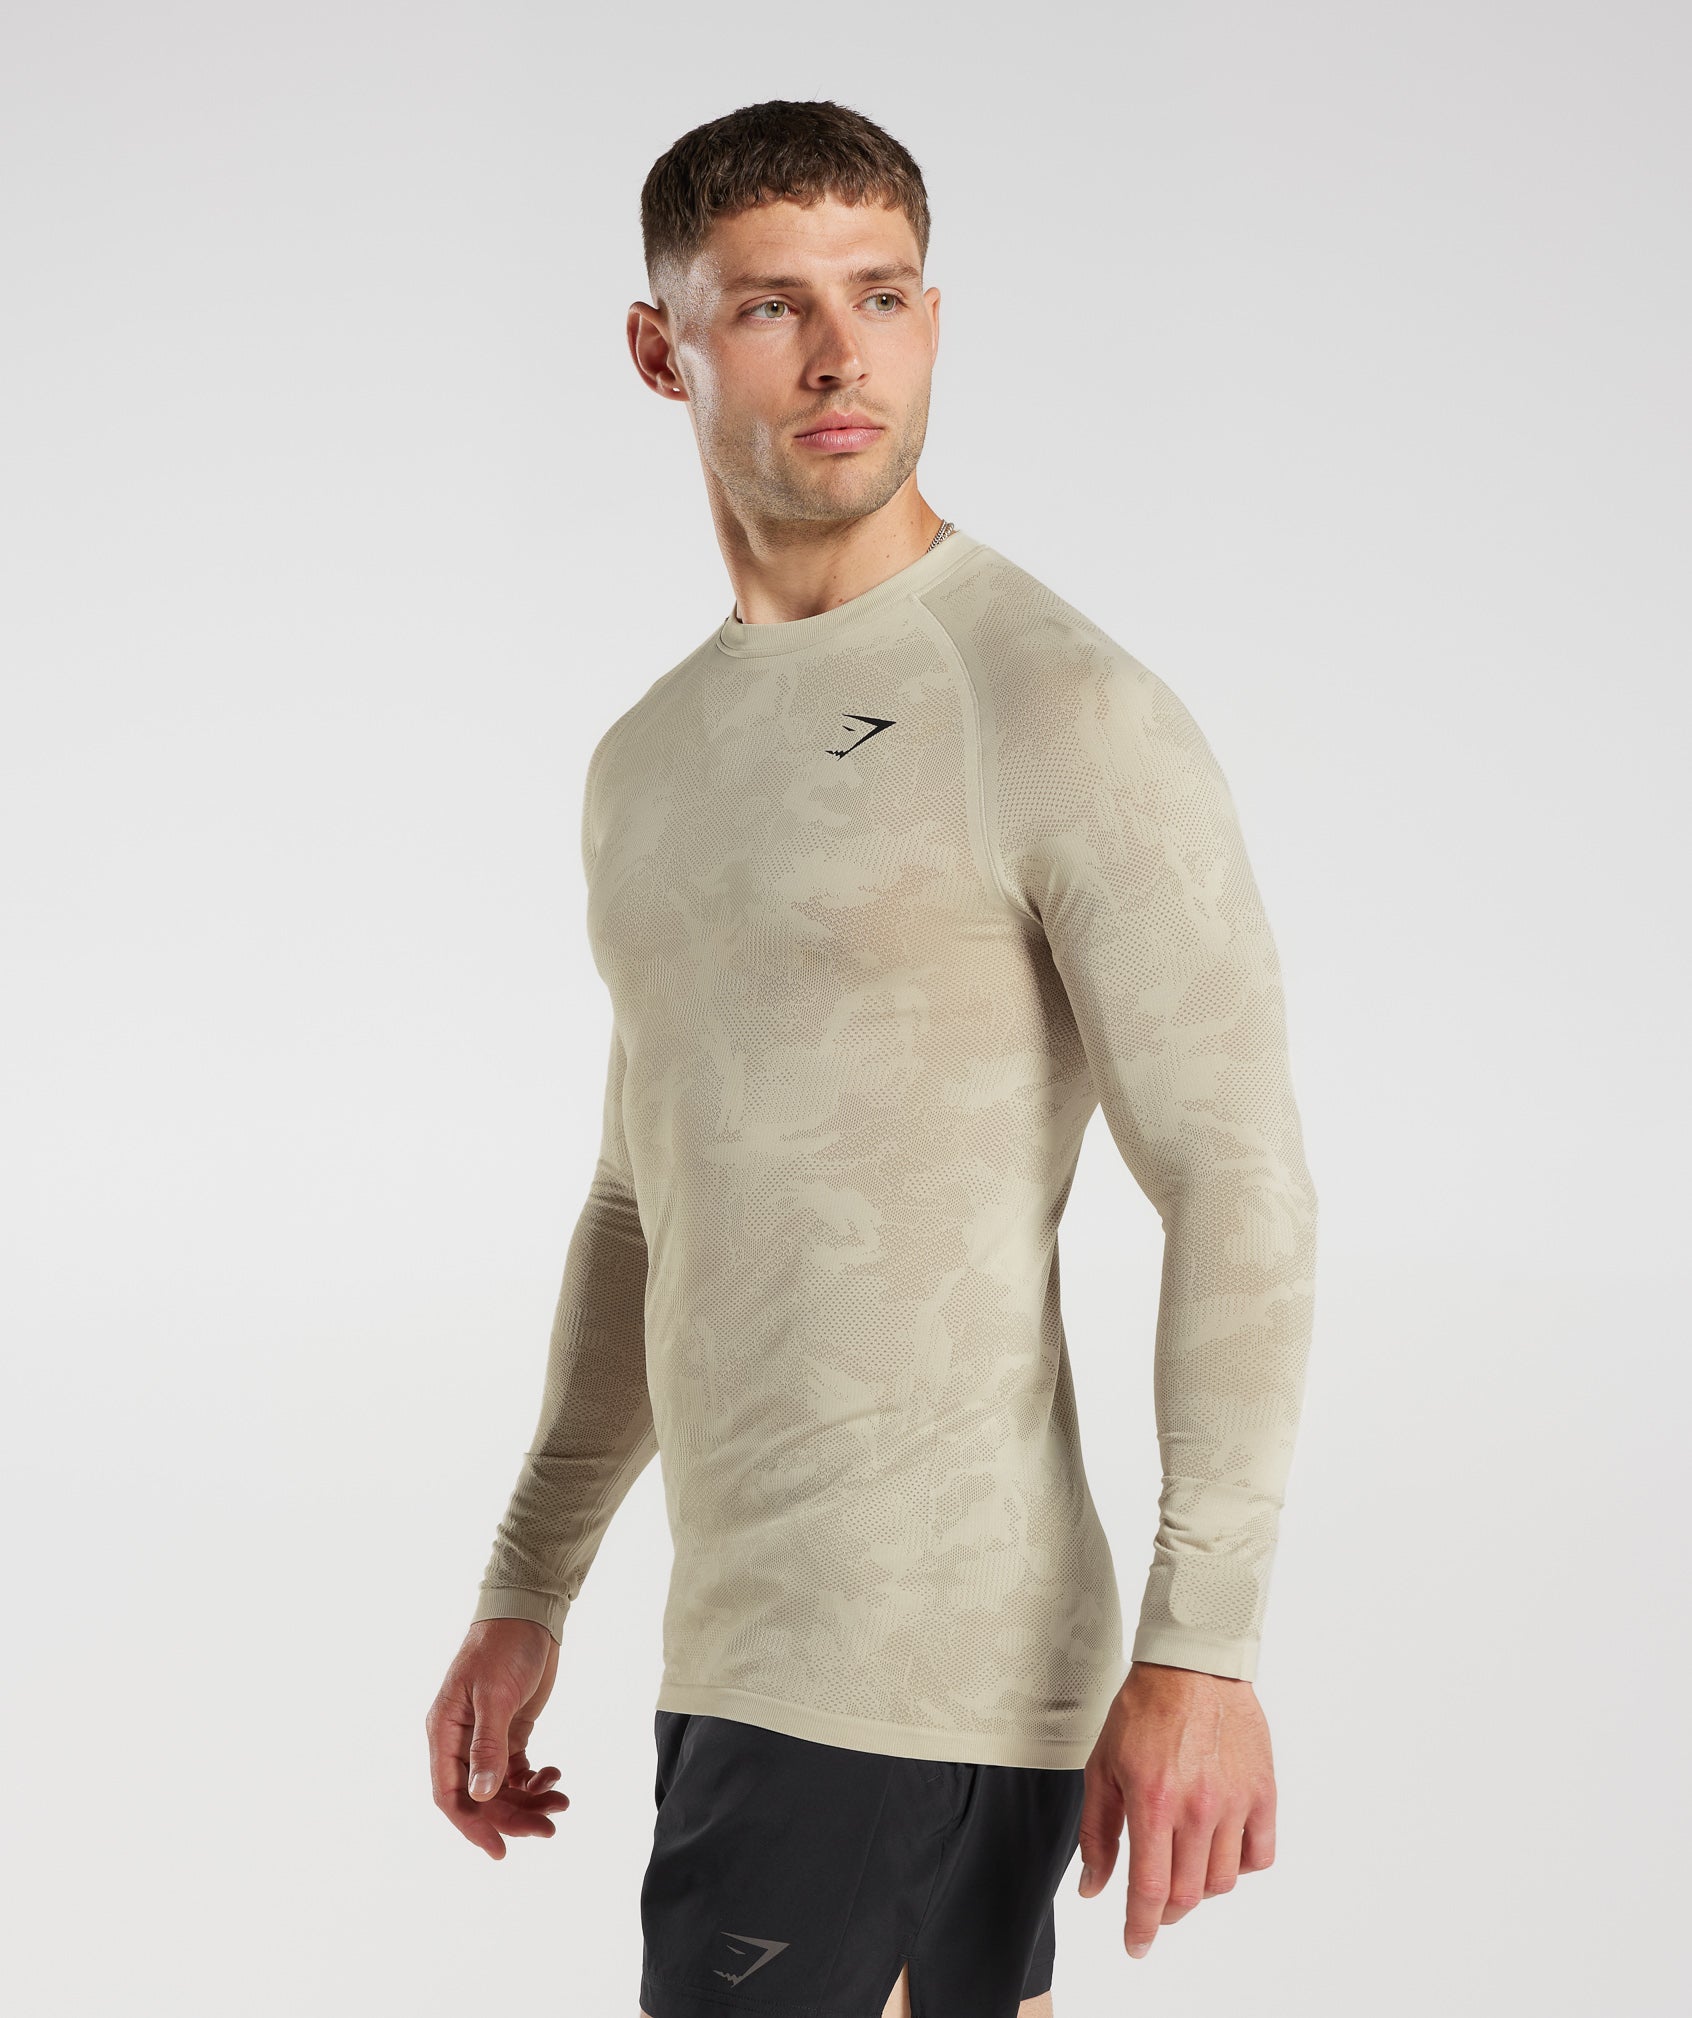 Geo Seamless Long Sleeve T-Shirt in Pebble Grey/Cement Brown - view 3